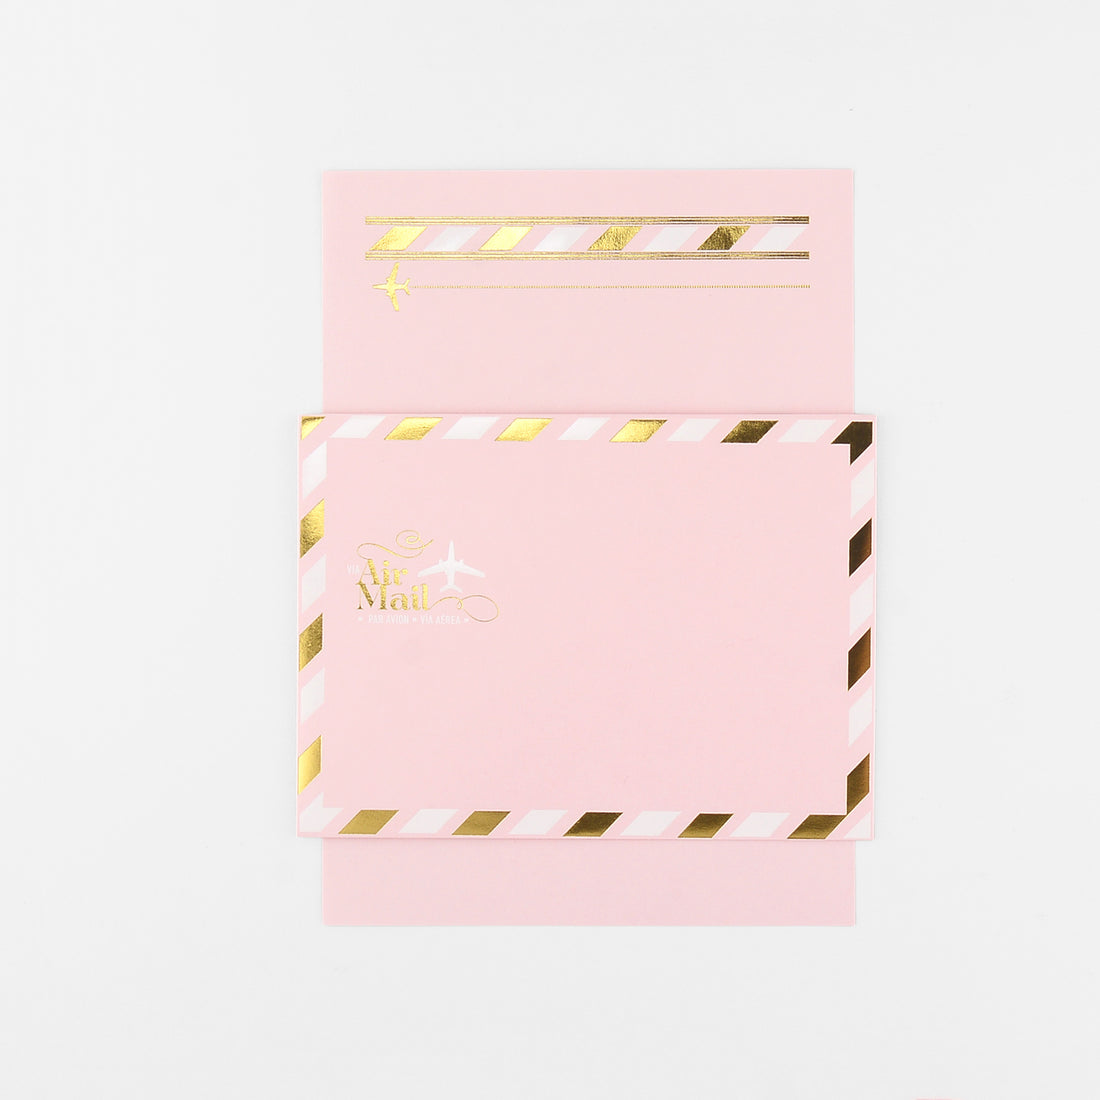 LA Paper Lover Airmail Metallic Gold + White On Pink 